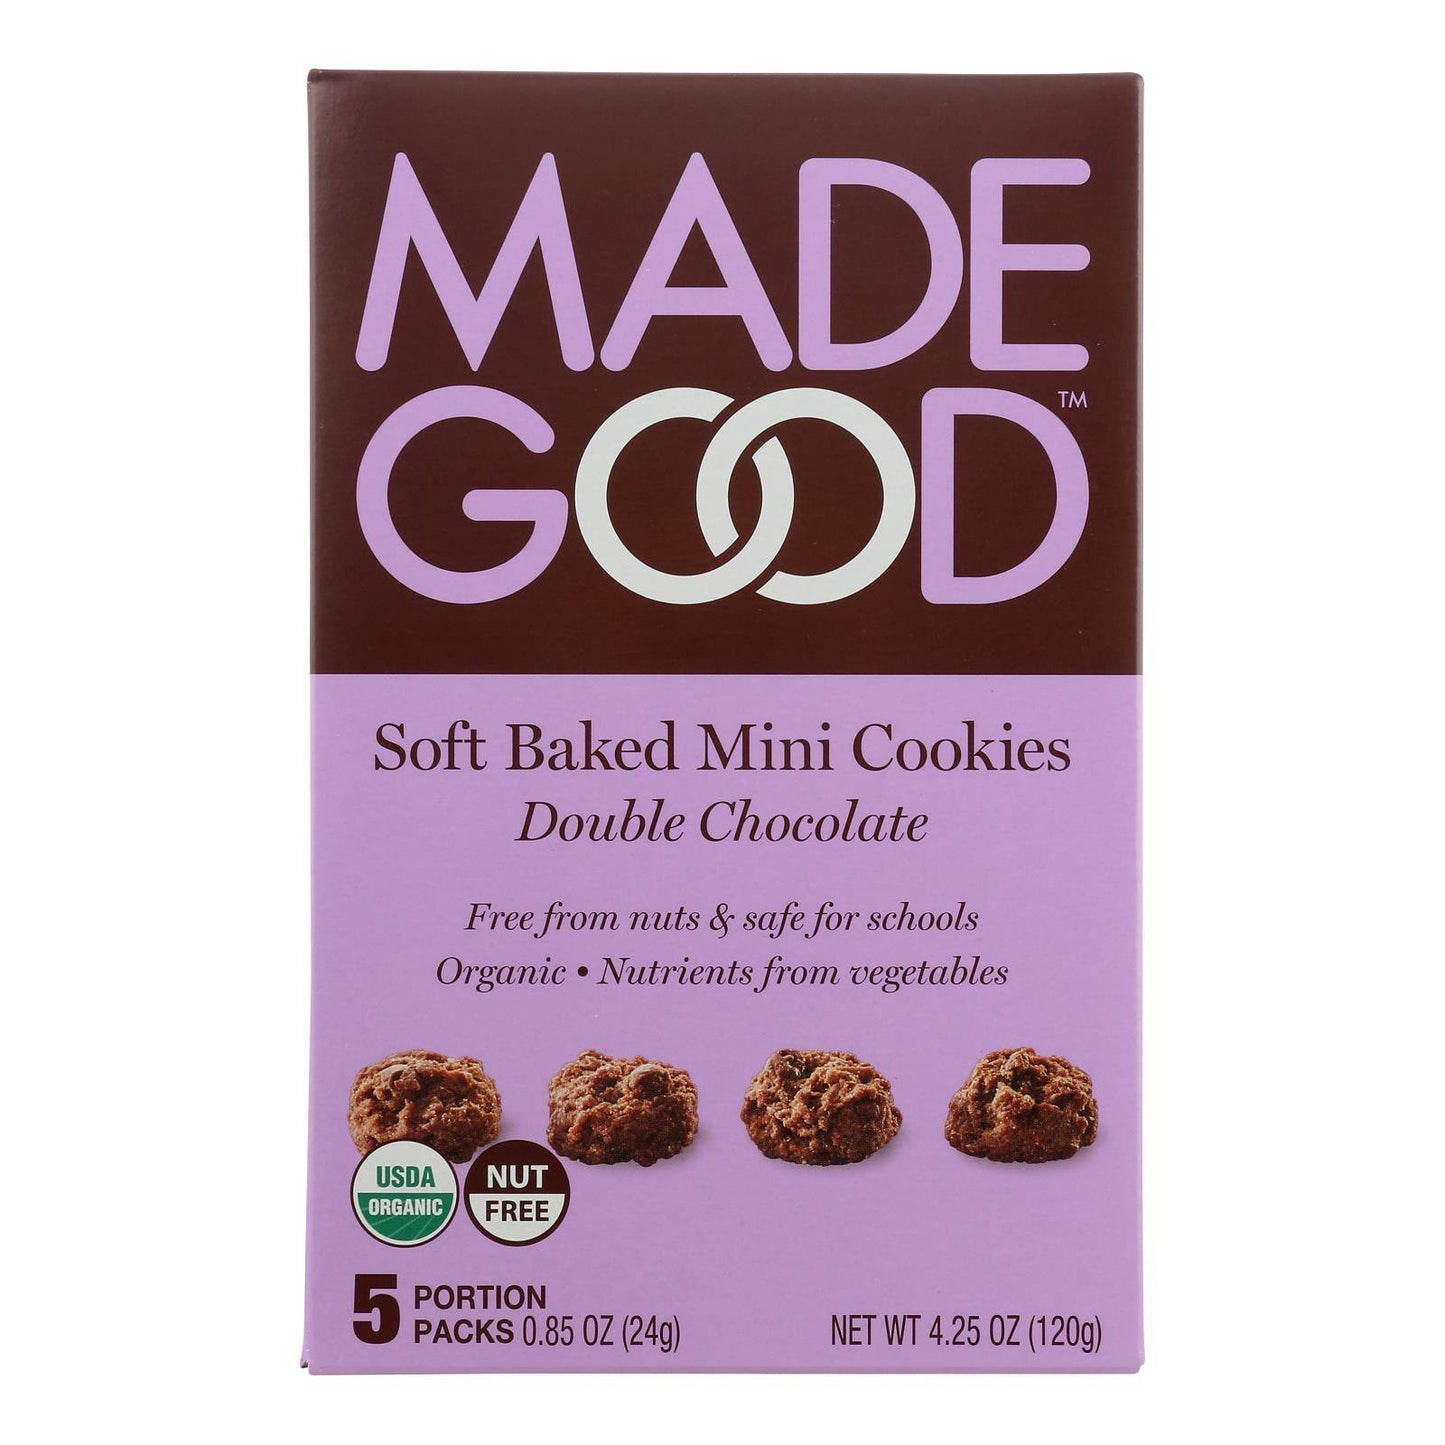 Made Good Soft Baked Mini Cookies - Double Chocolate - Case Of 6 - 4.25 Oz. | OnlyNaturals.us